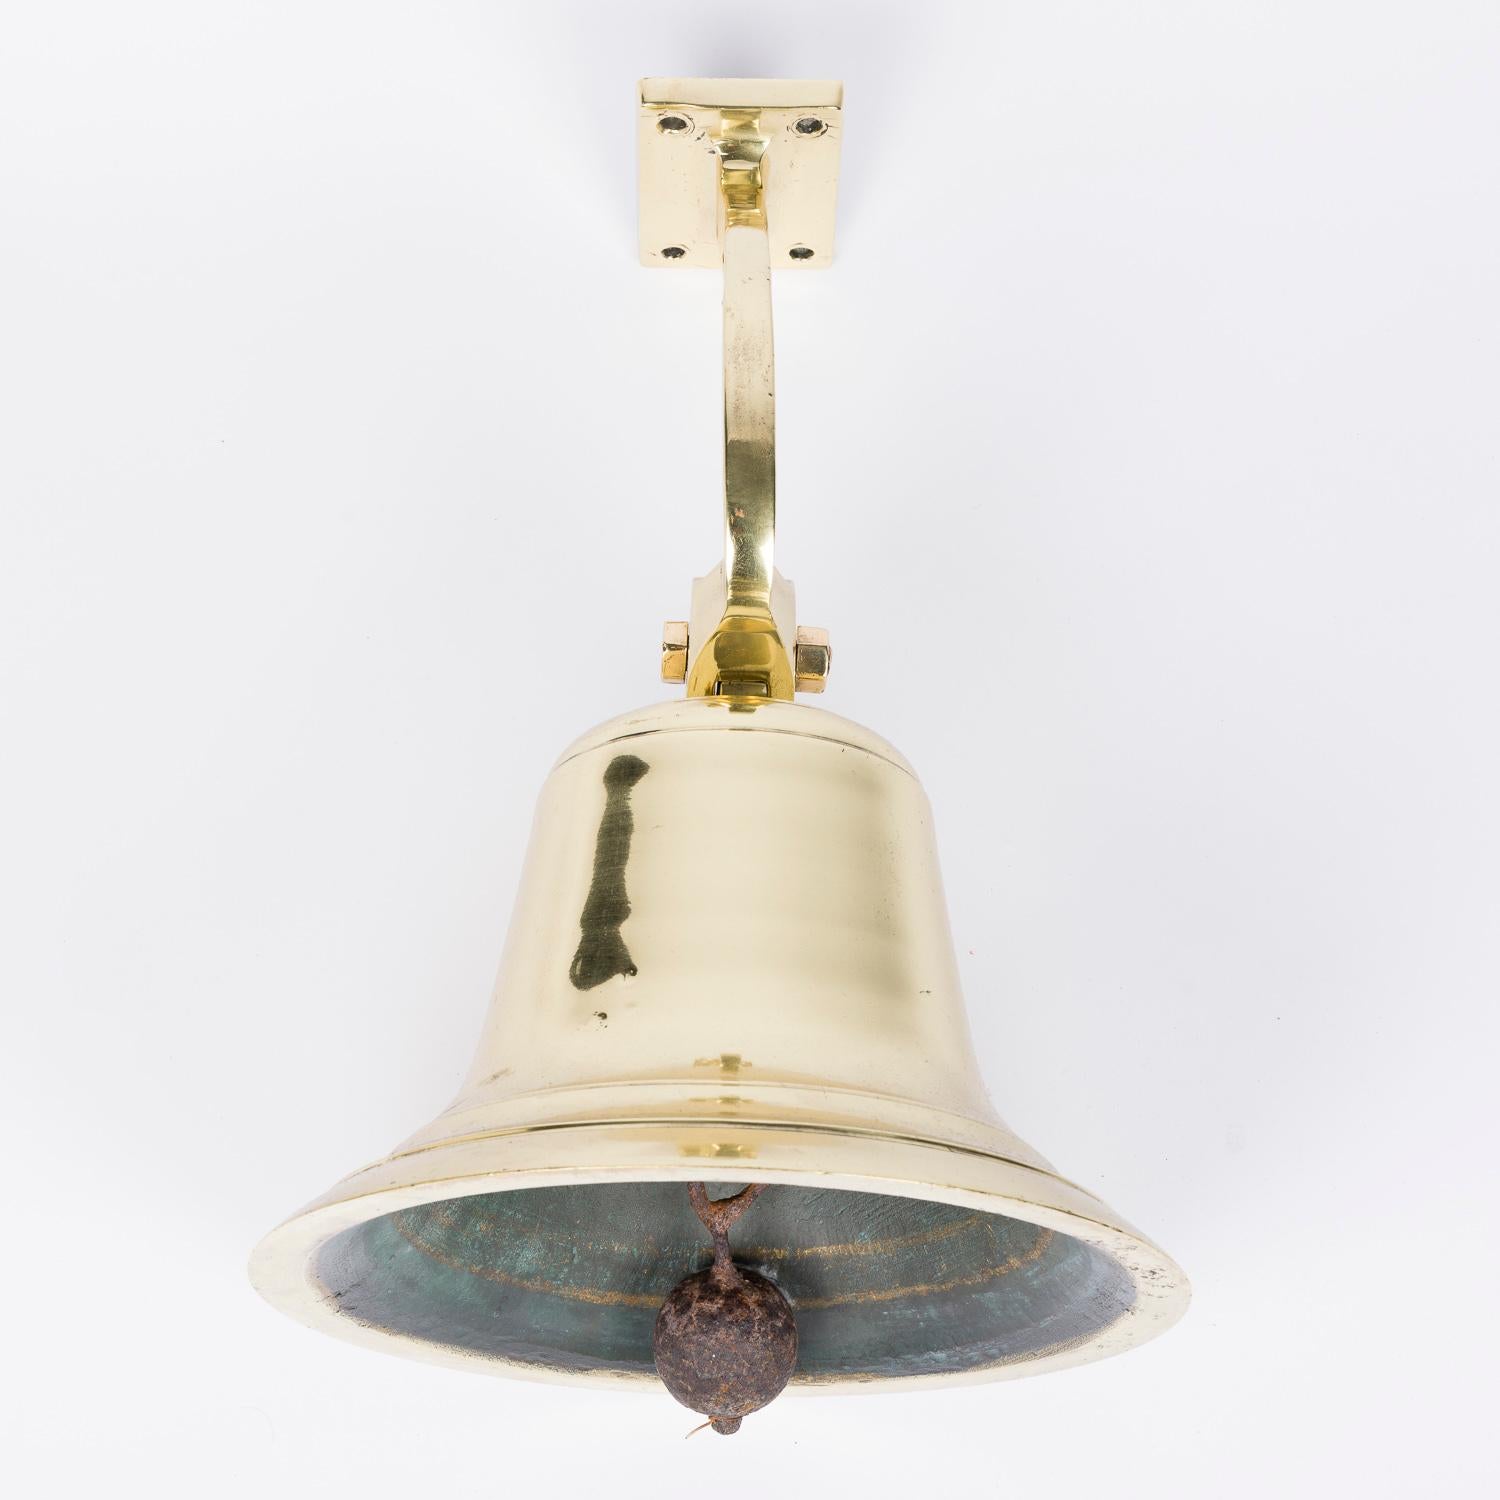 English Wall mounted bell For Sale